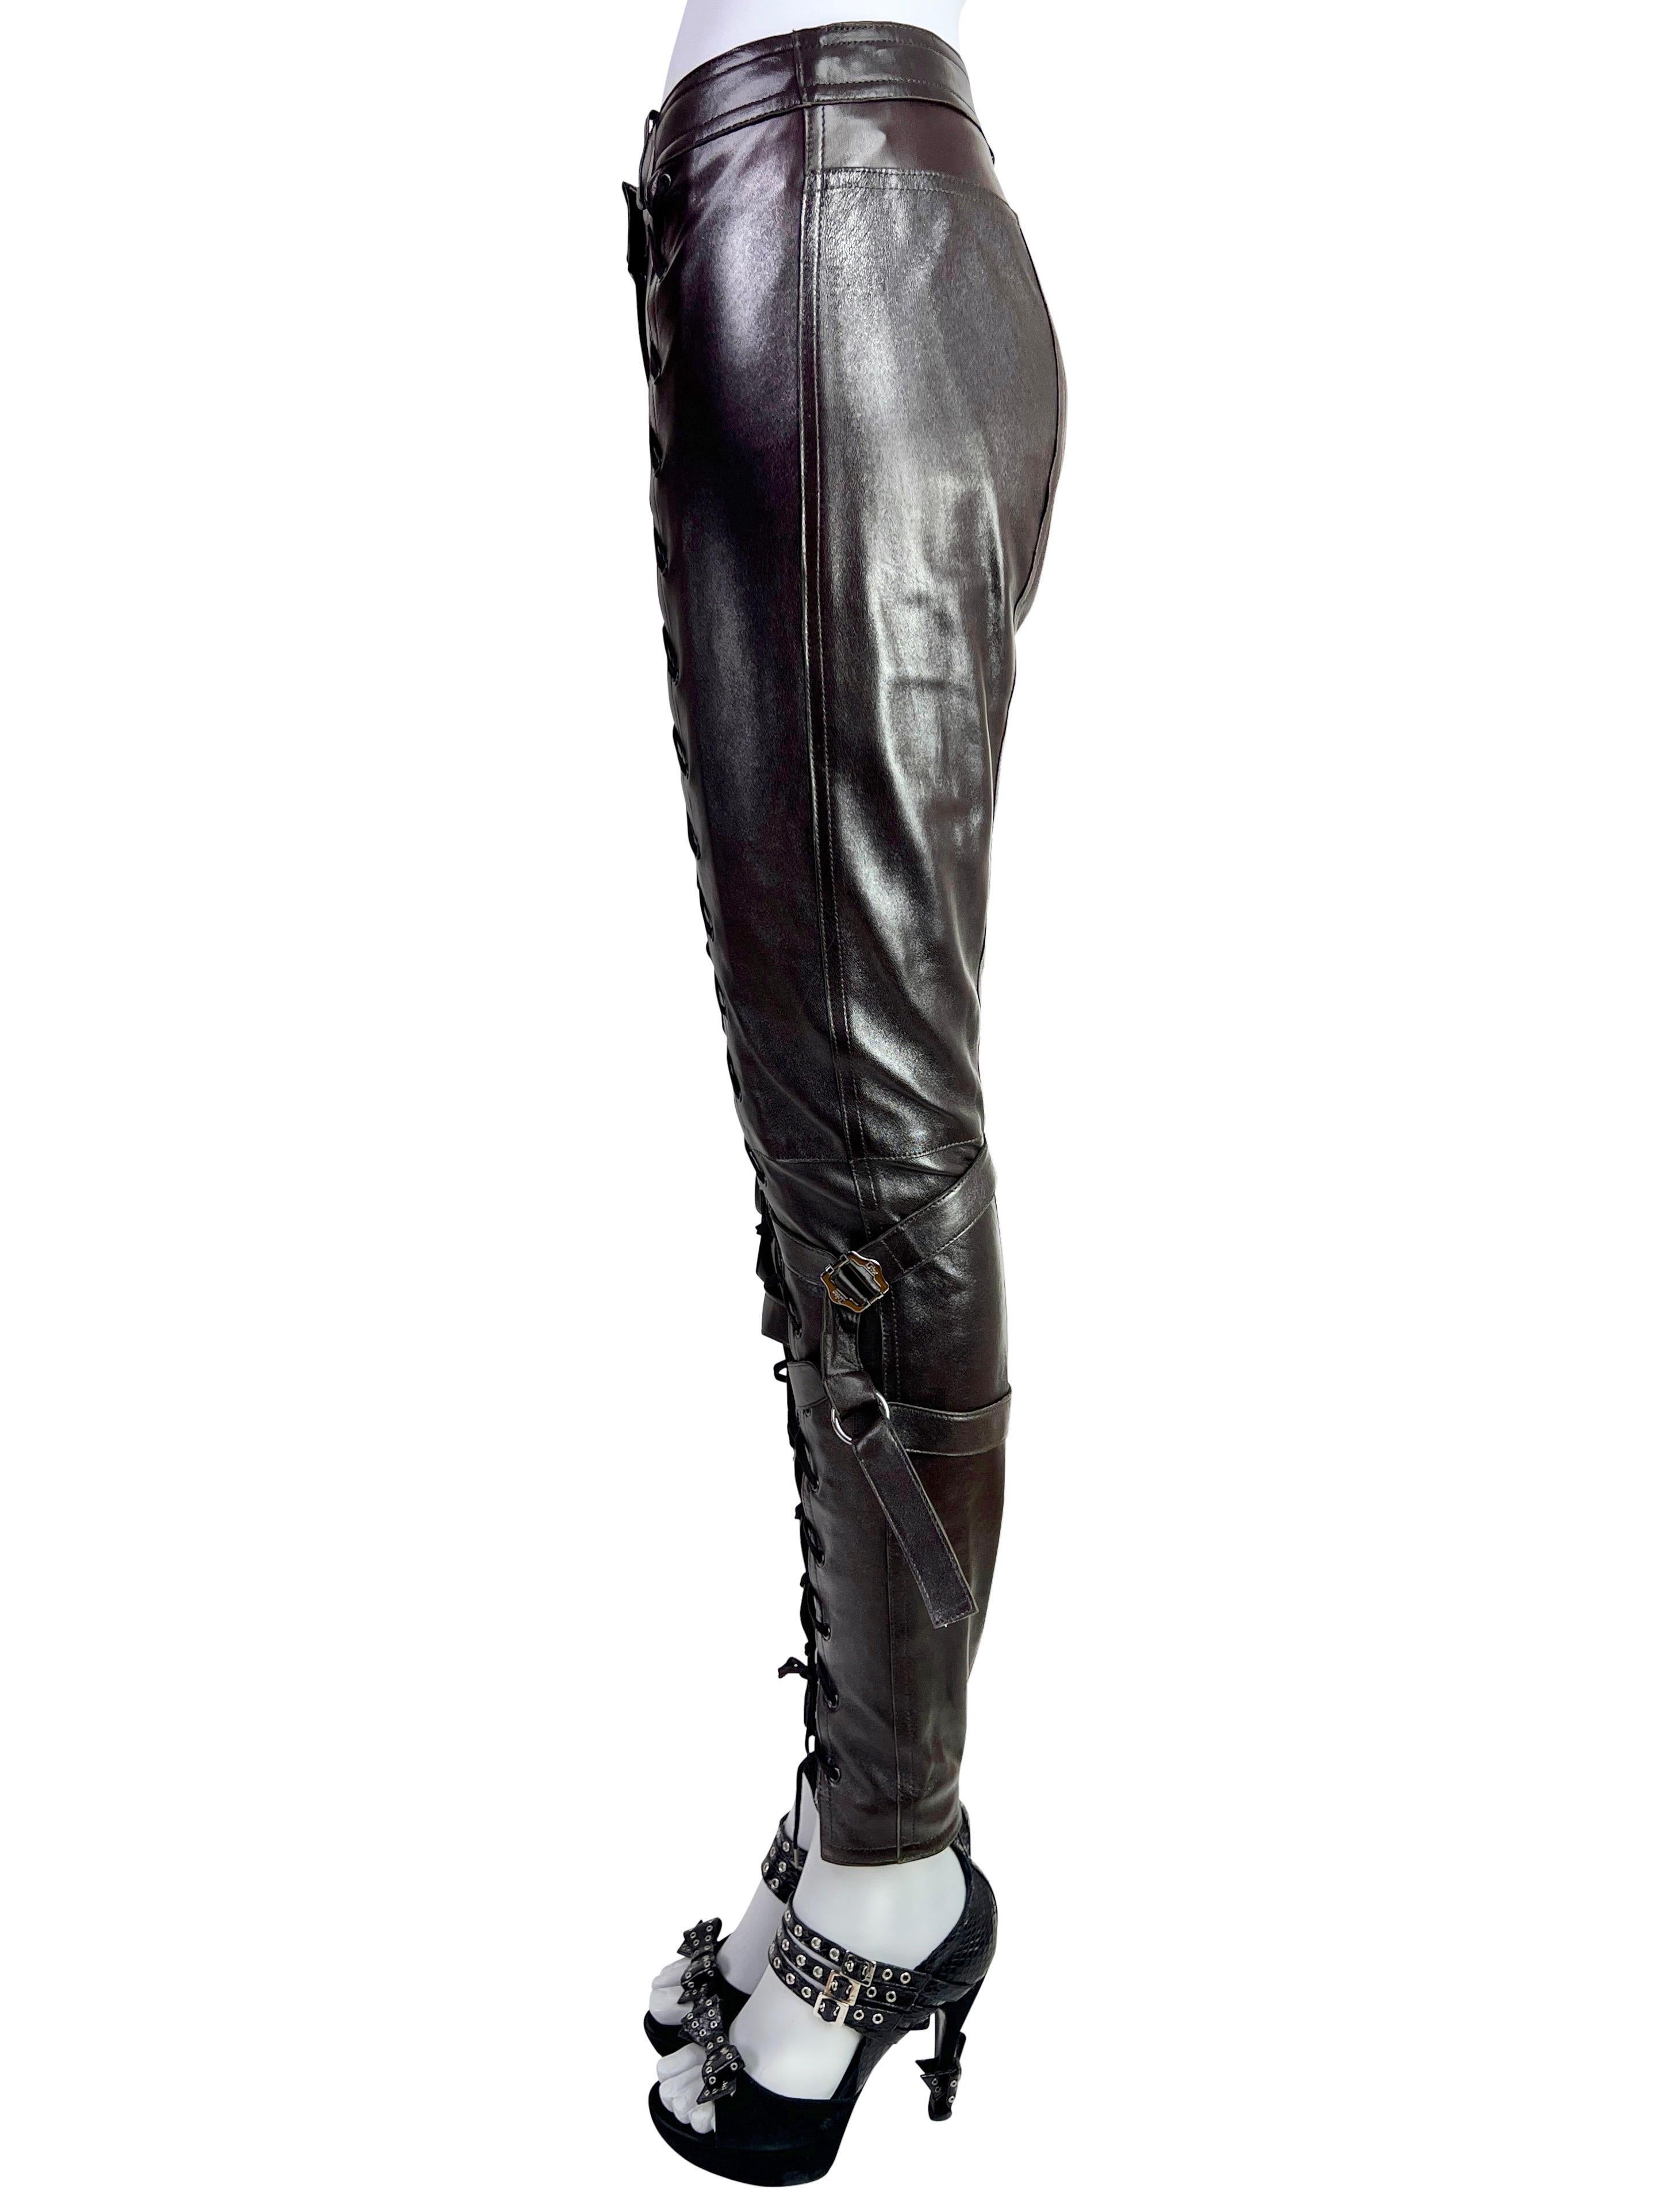 Dior by John Galliano Fall 2003 Leather Lace-Up Pants in Dark Chocolate For Sale 9